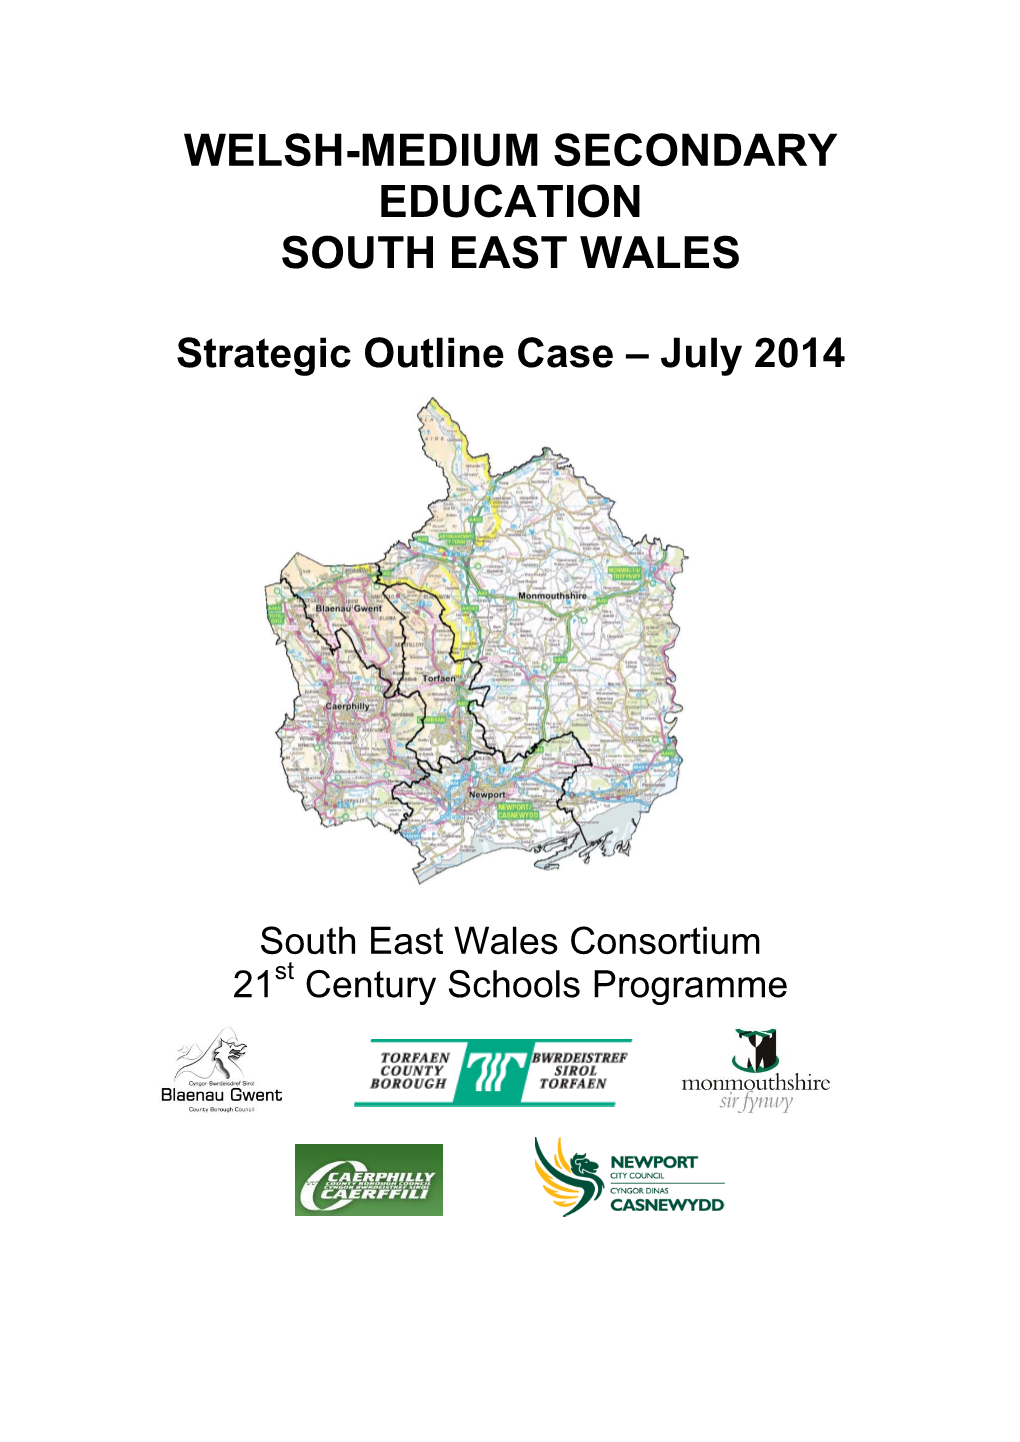 Welsh-Medium Secondary Education South East Wales